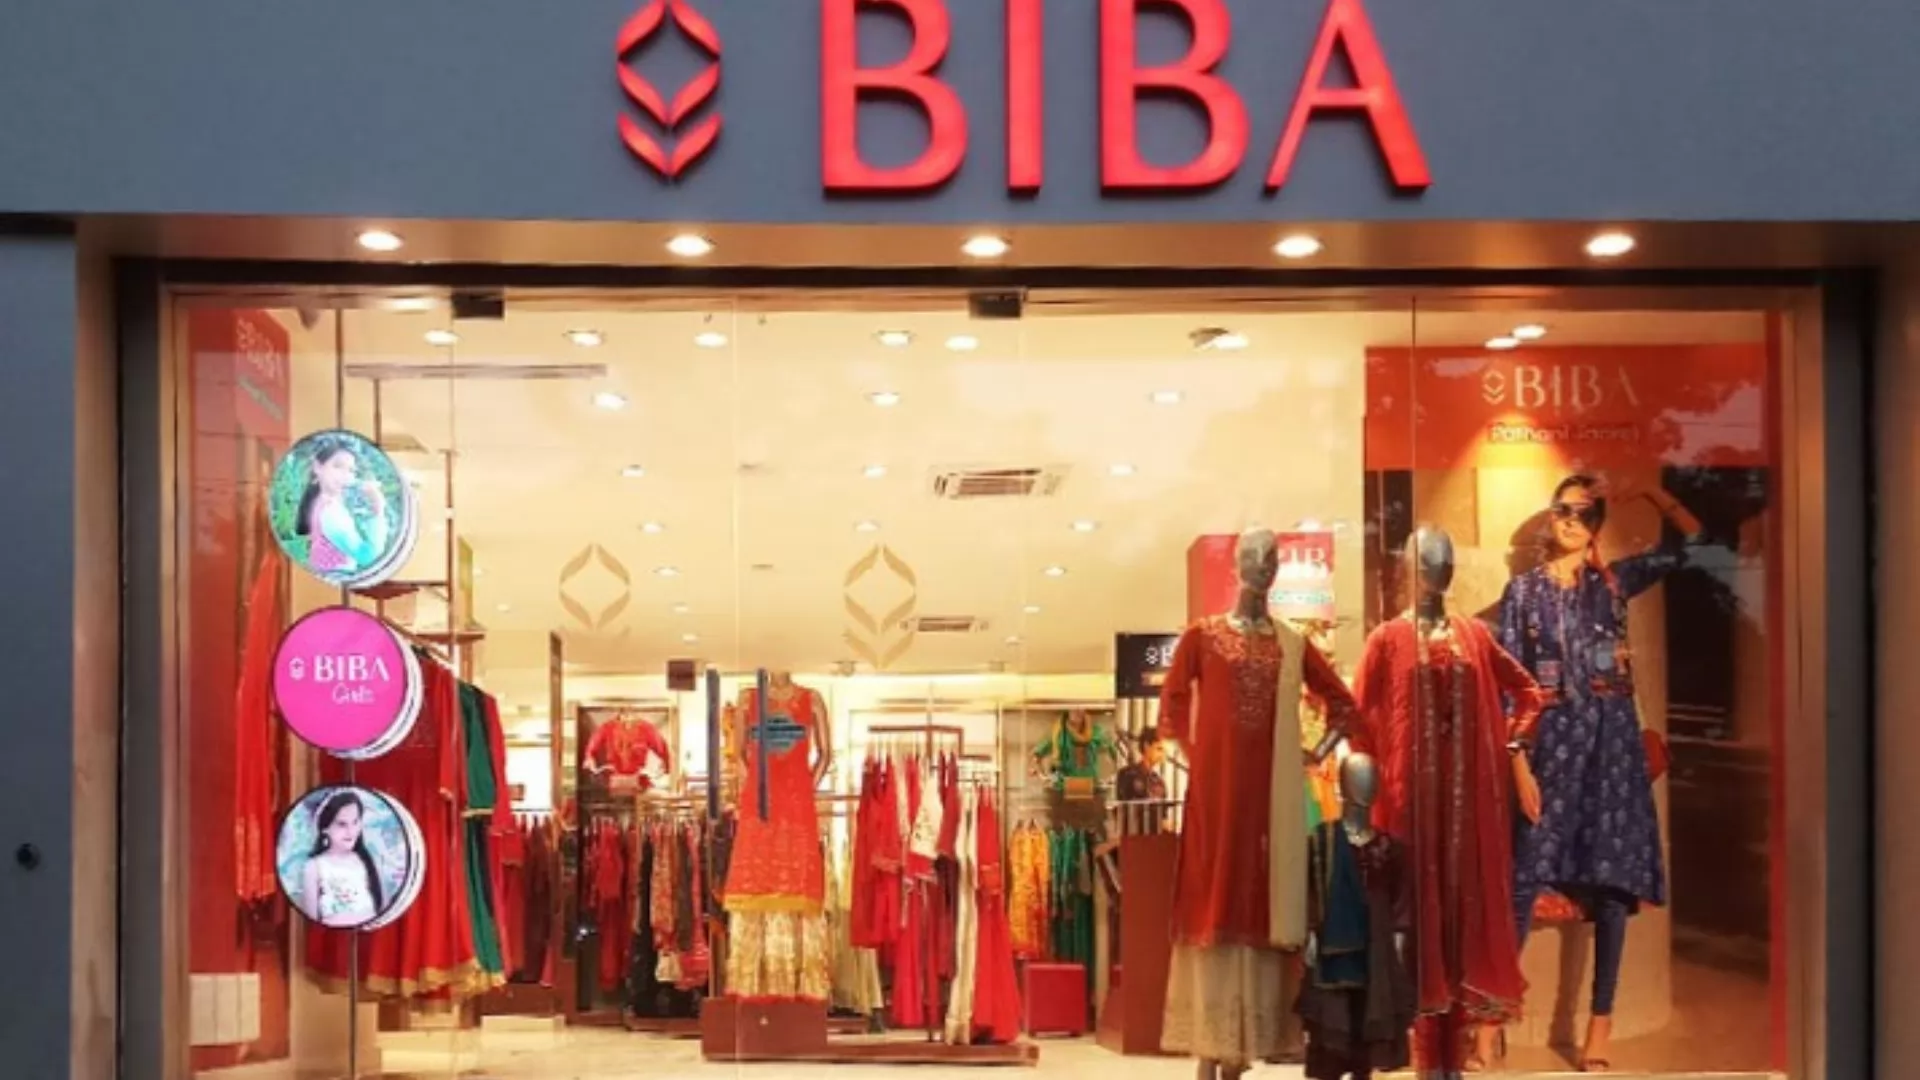 Top Clothing Brands in India: Check Out The Complete List Here!